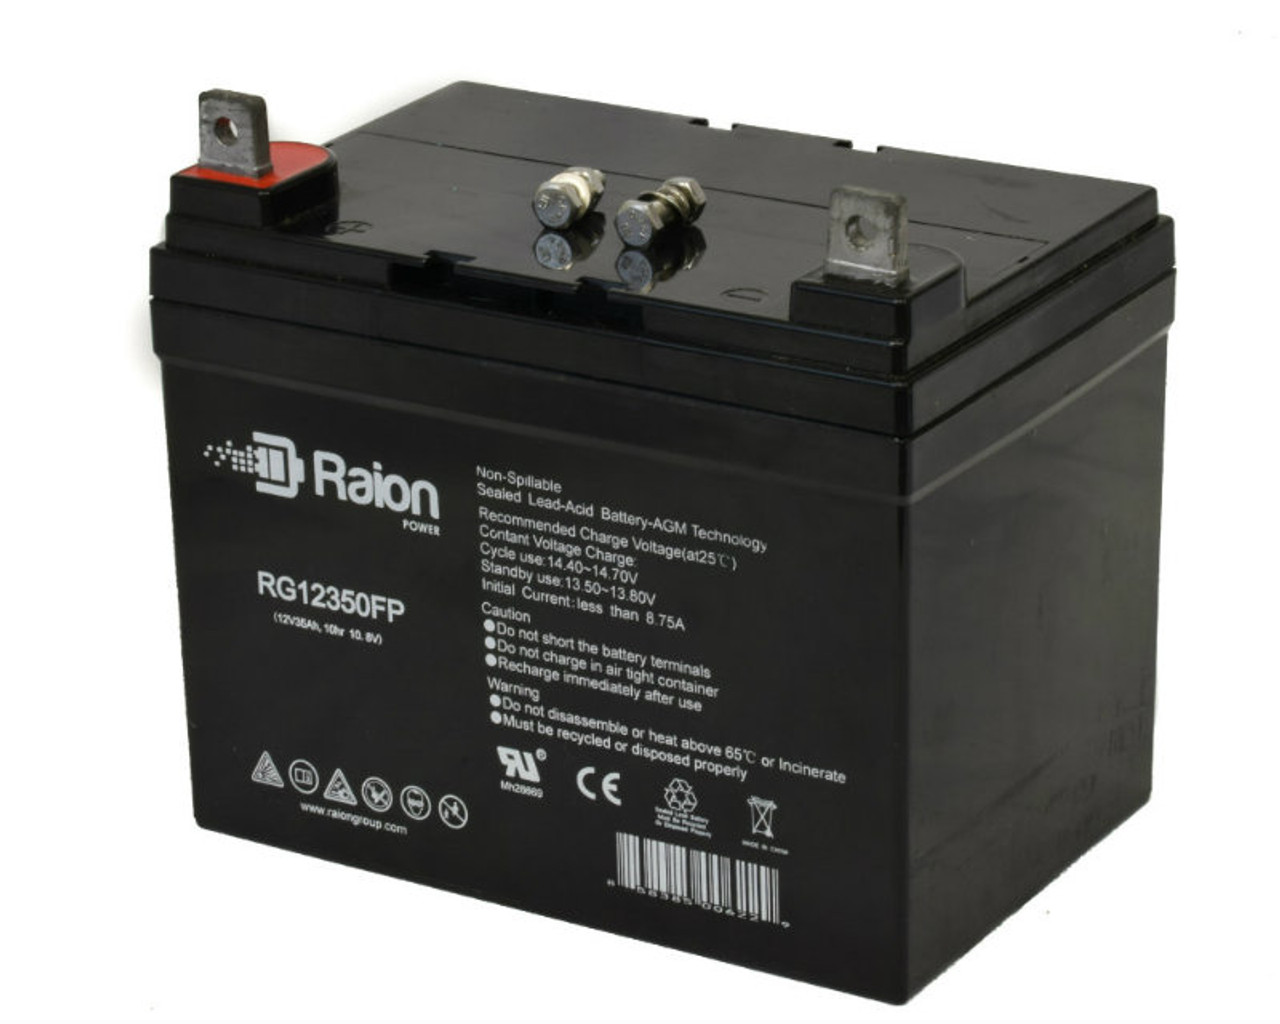 Raion Power Replacement 12V 35Ah RG12350FP Battery for Ariens/Gravely GS22H